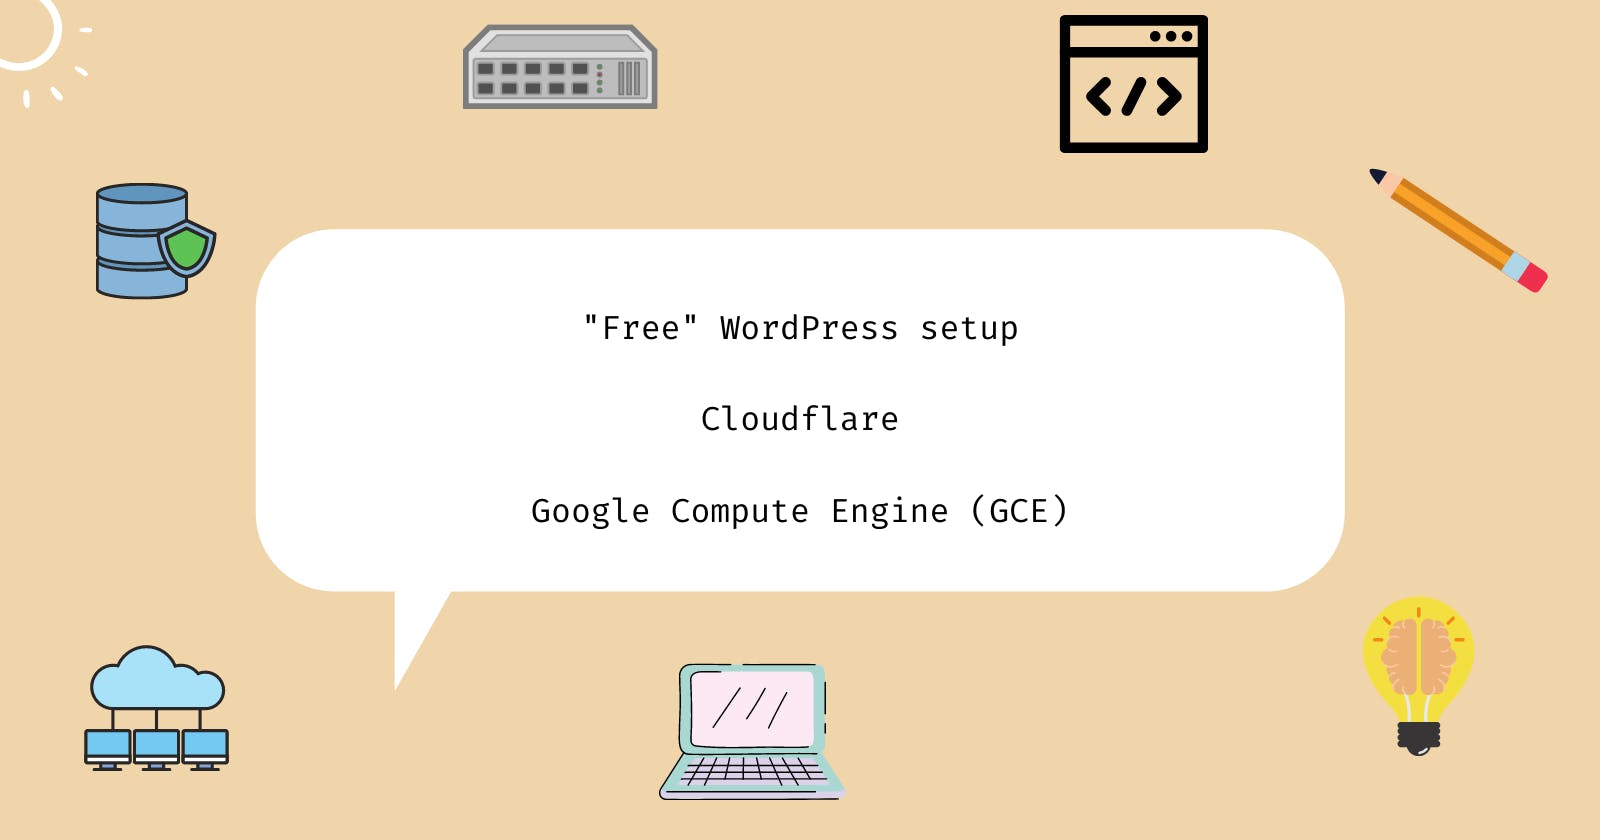 Host a free WordPress site with Google Cloud and Cloudflare 💰